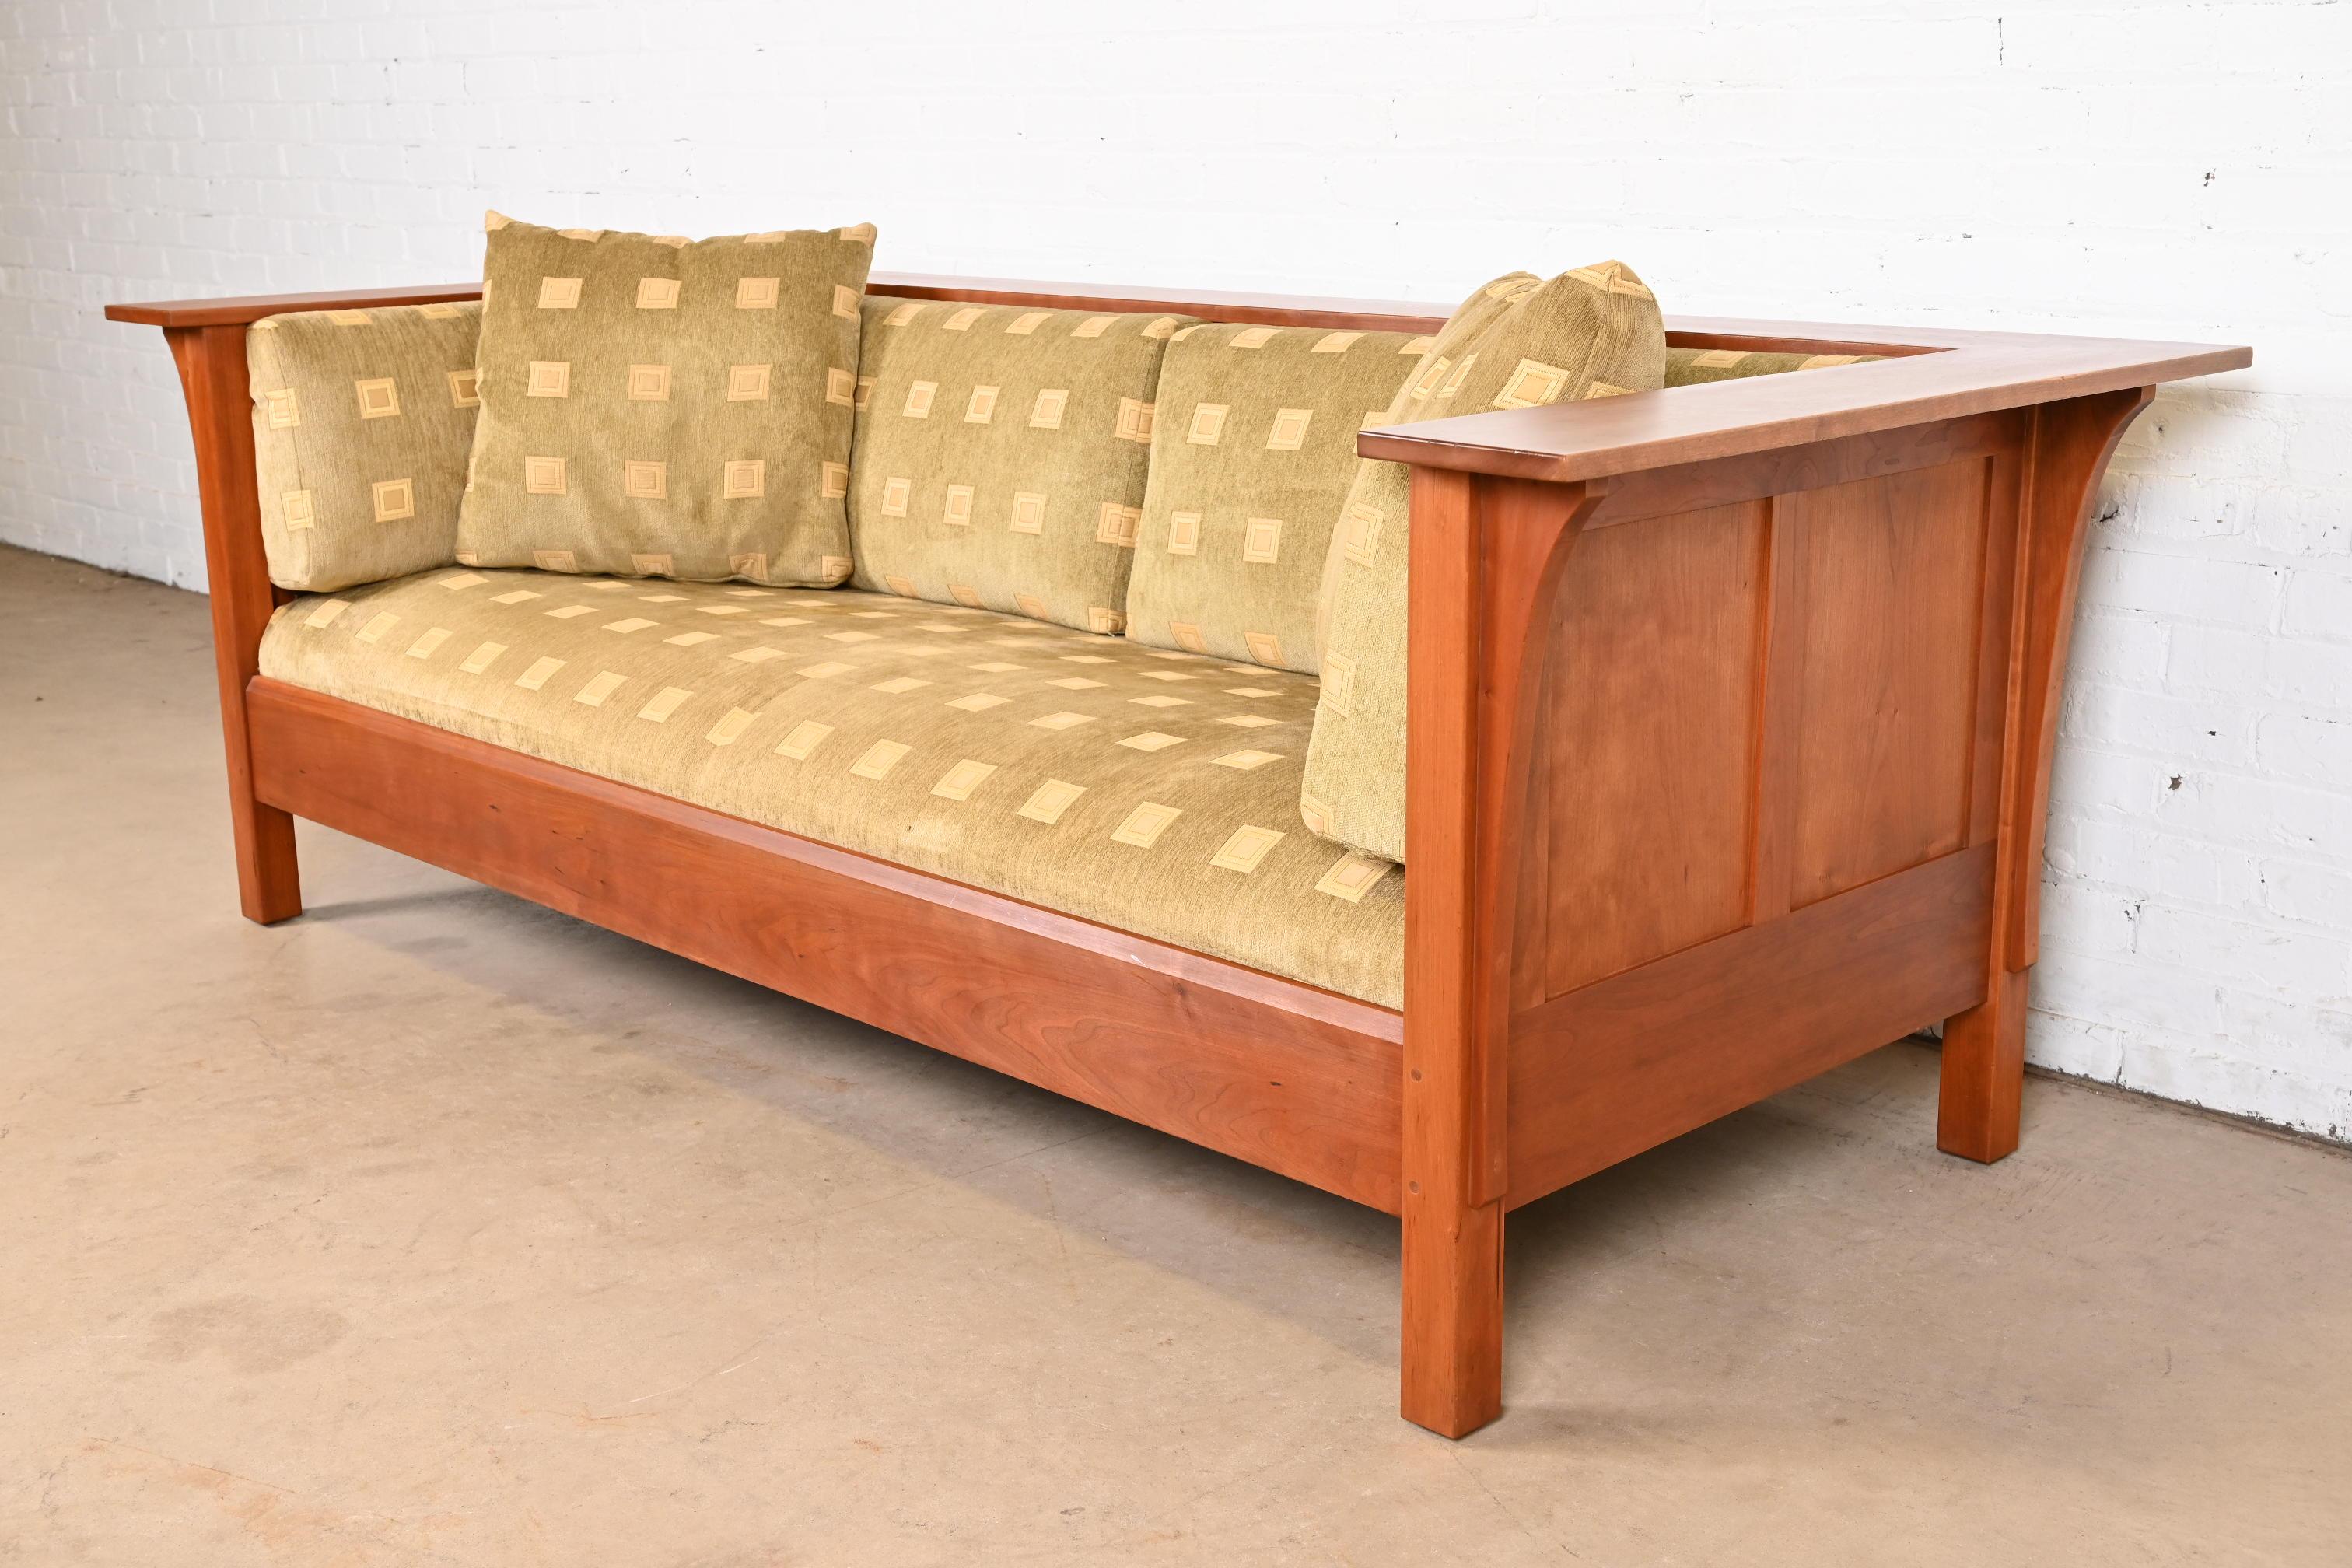 Stickley Mission Arts and Crafts Cherry Wood Settle Sofa In Good Condition For Sale In South Bend, IN